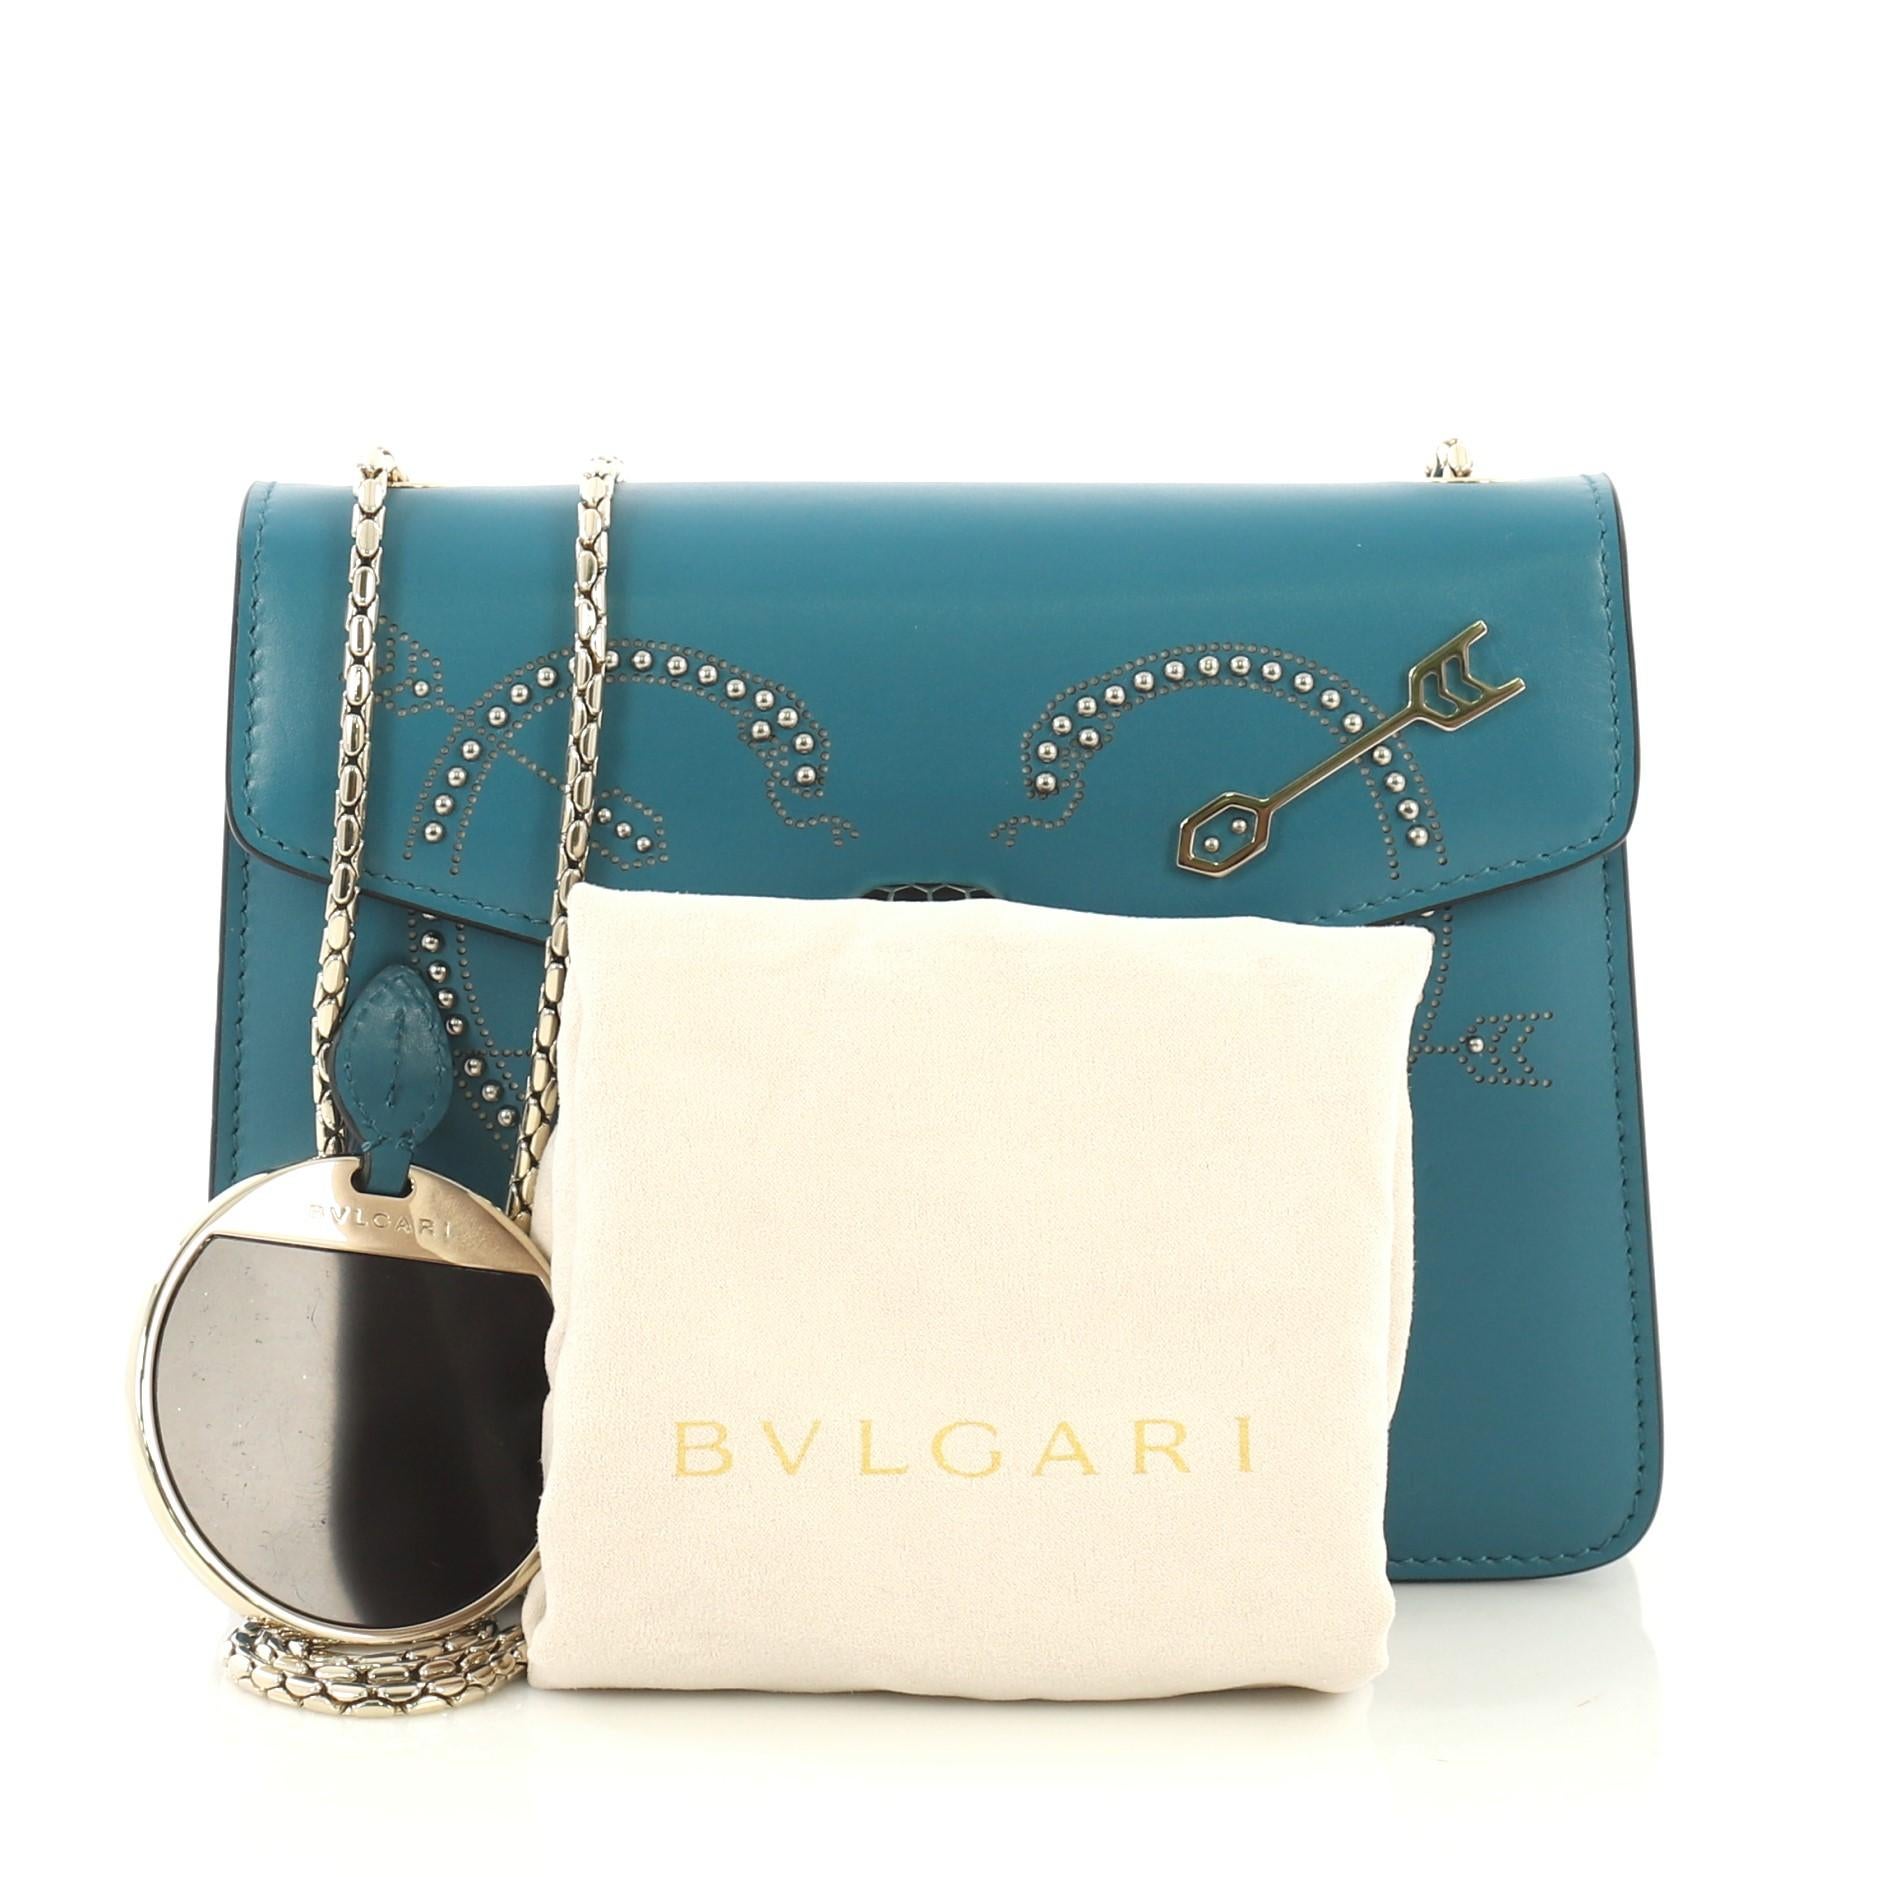 This Bvlgari Serpenti Forever Shoulder Bag Embellished Leather Small, crafted from blue embellished leather, features Serpenti head closure with malachite eyes and gold-tone hardware. It opens to a pink leather interior with side slip pocket.